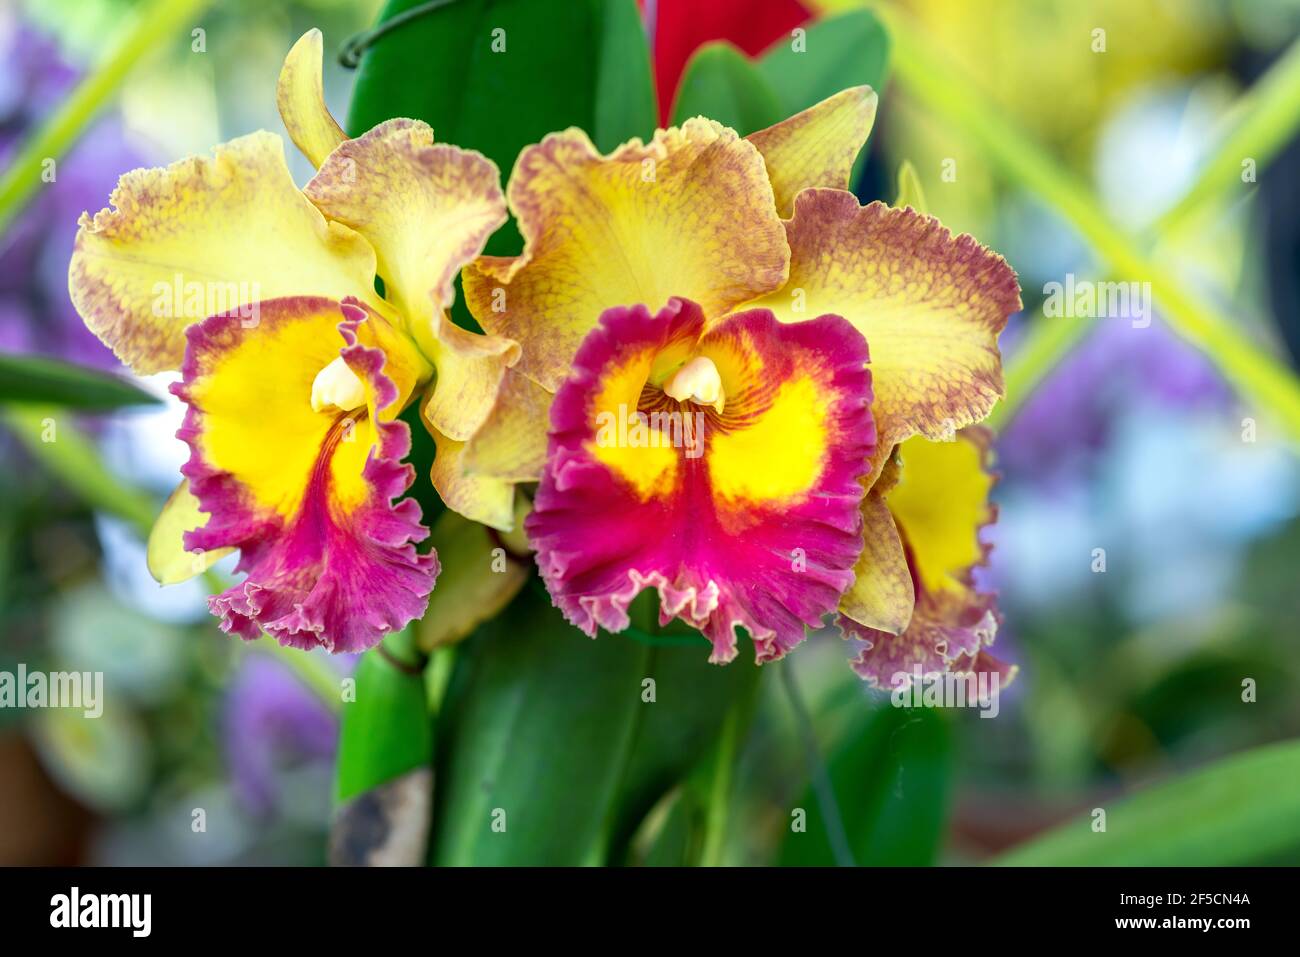 Cattleya Labiata flowers bloom in the spring sunshine, a rare forest orchid decorated in tropical gardens 2021 Stock Photo